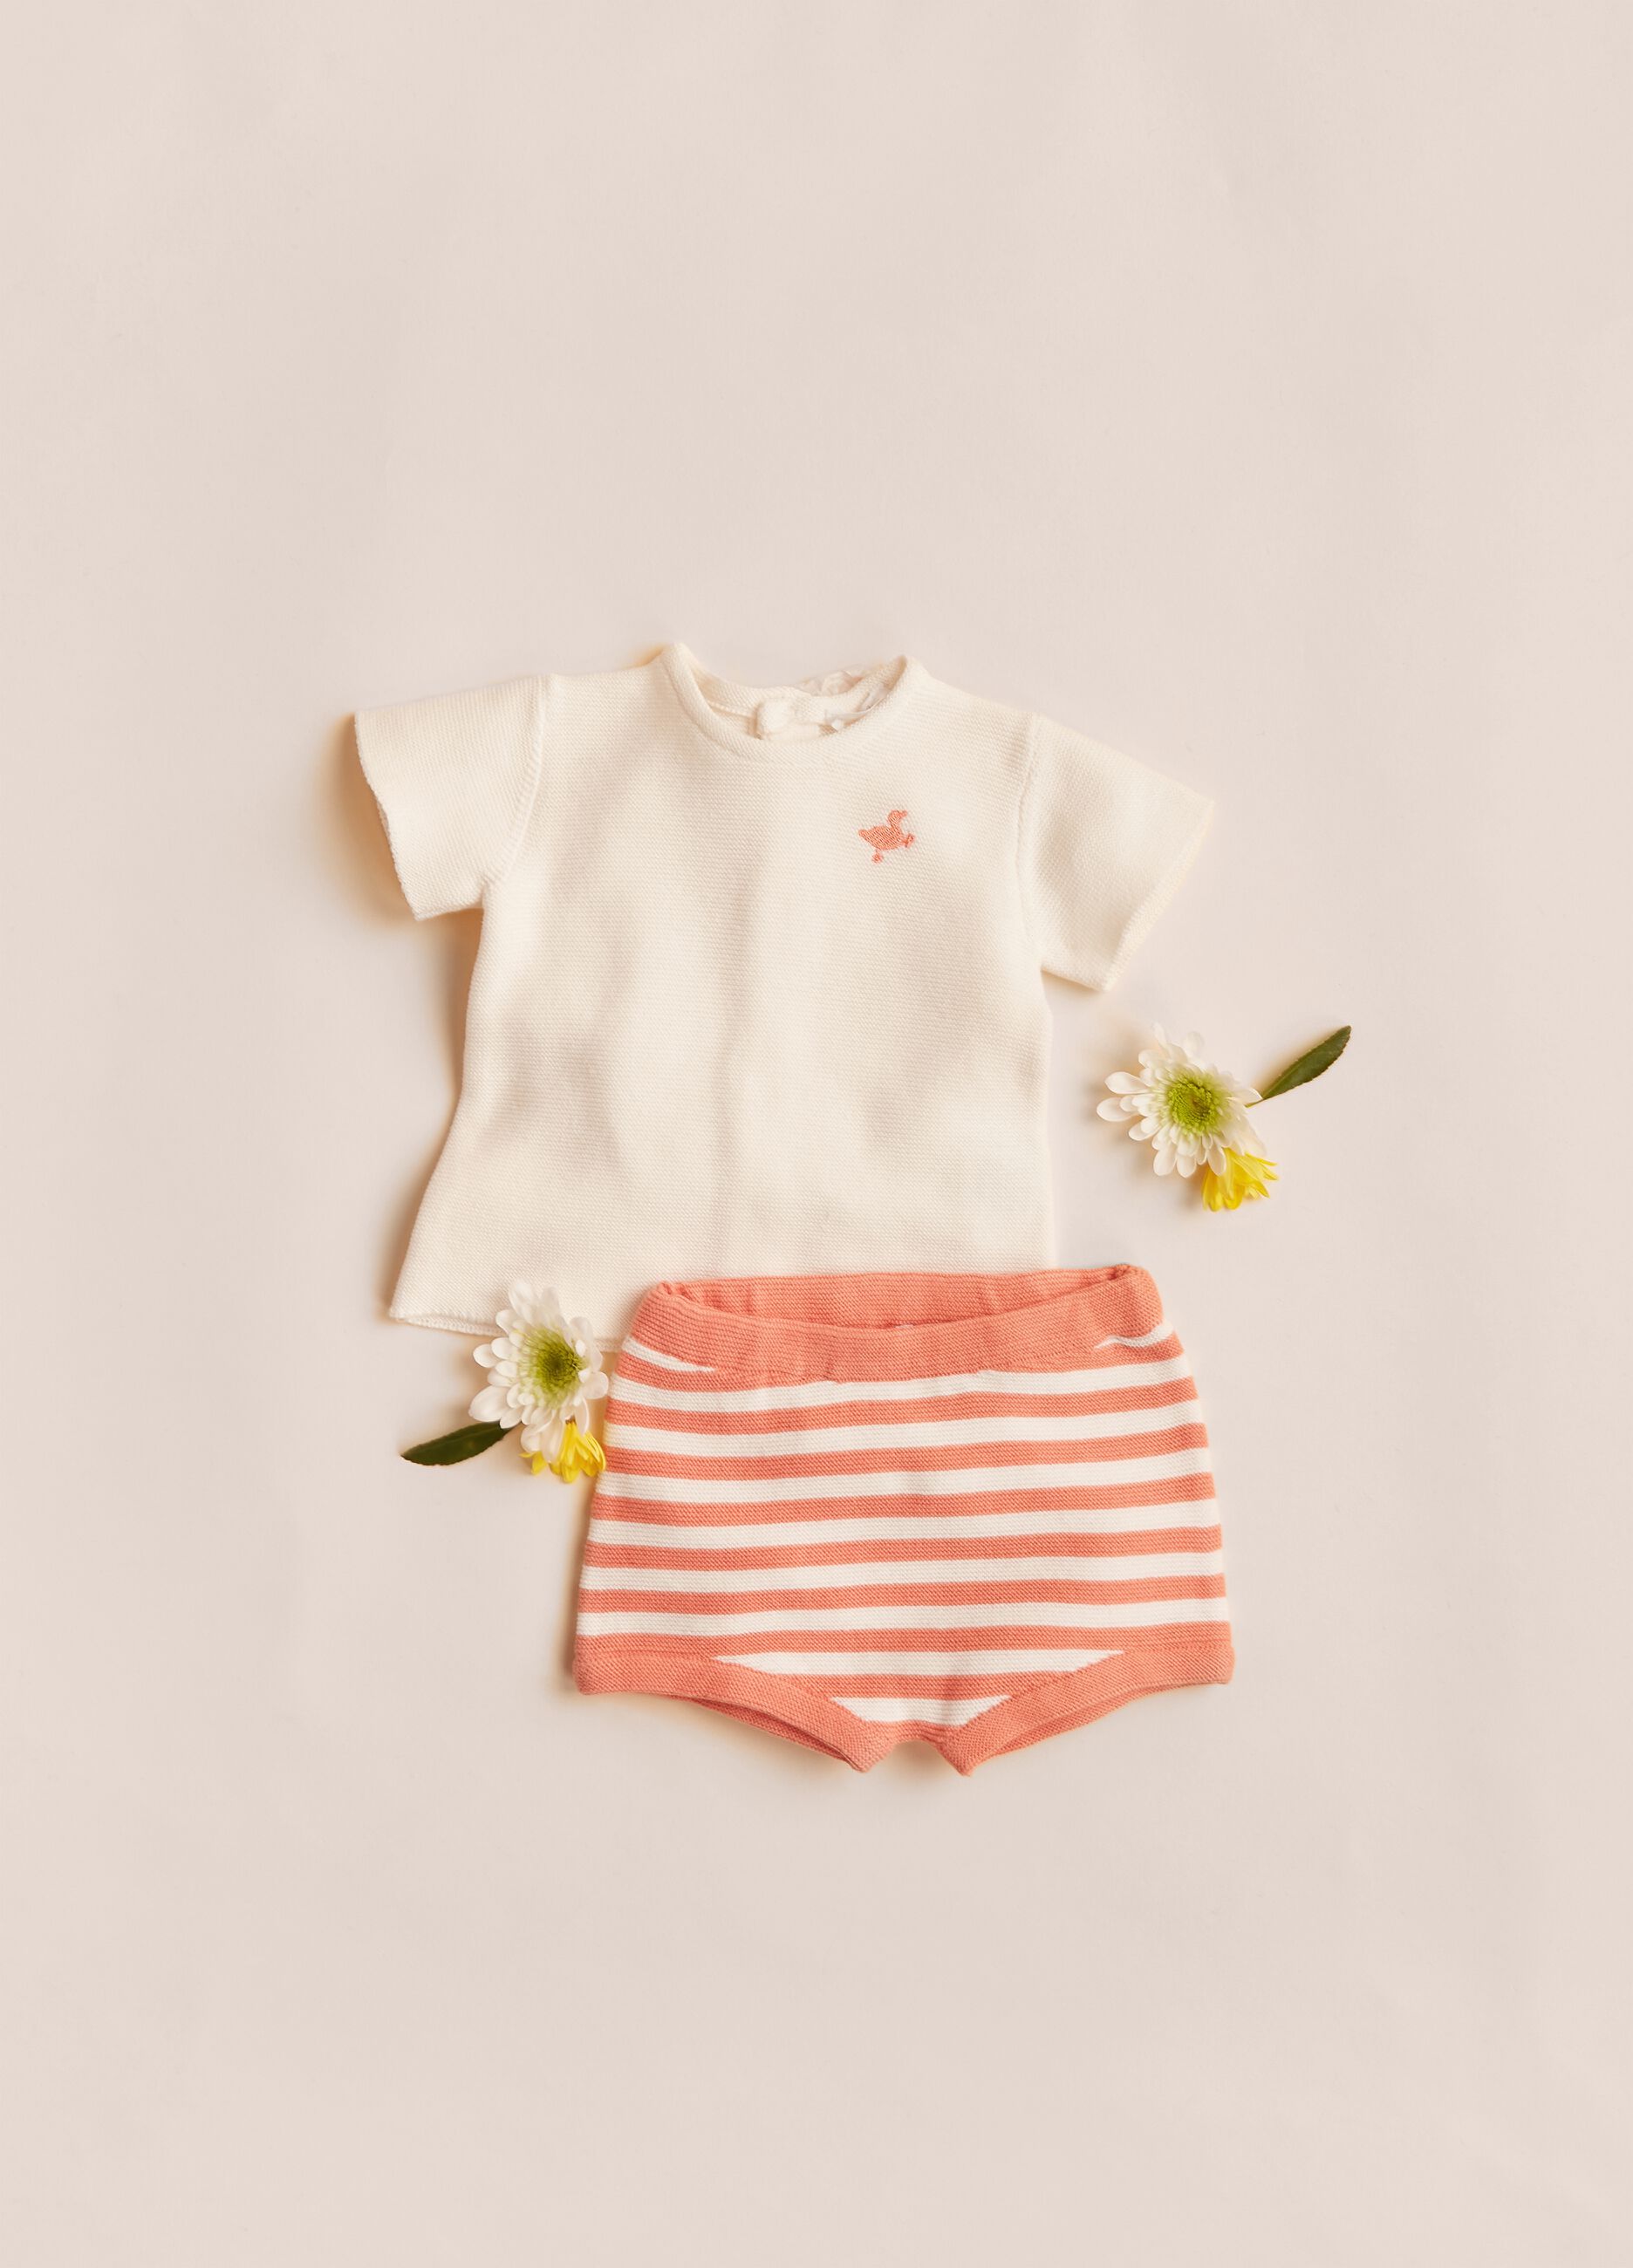 IANA knitted outfit in 100% organic cotton